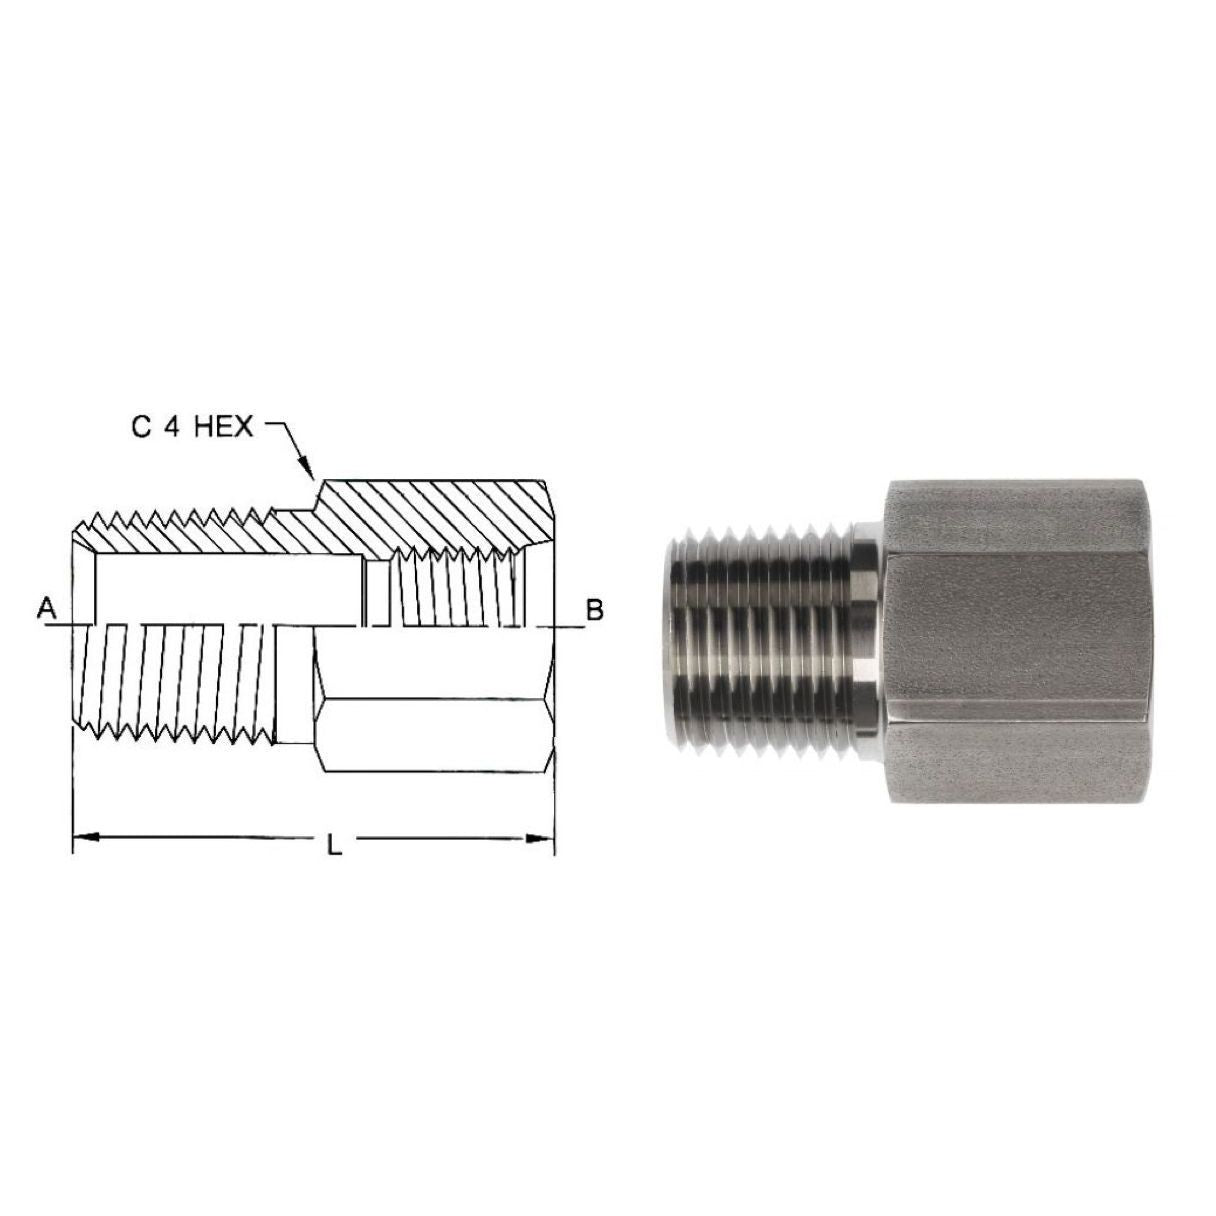 6404-06-06 : OneHydraulics Adapter, Straight, 0.375 (3/8") Female ORB x 0.375 (3/8") Male, Steel, 6000psi